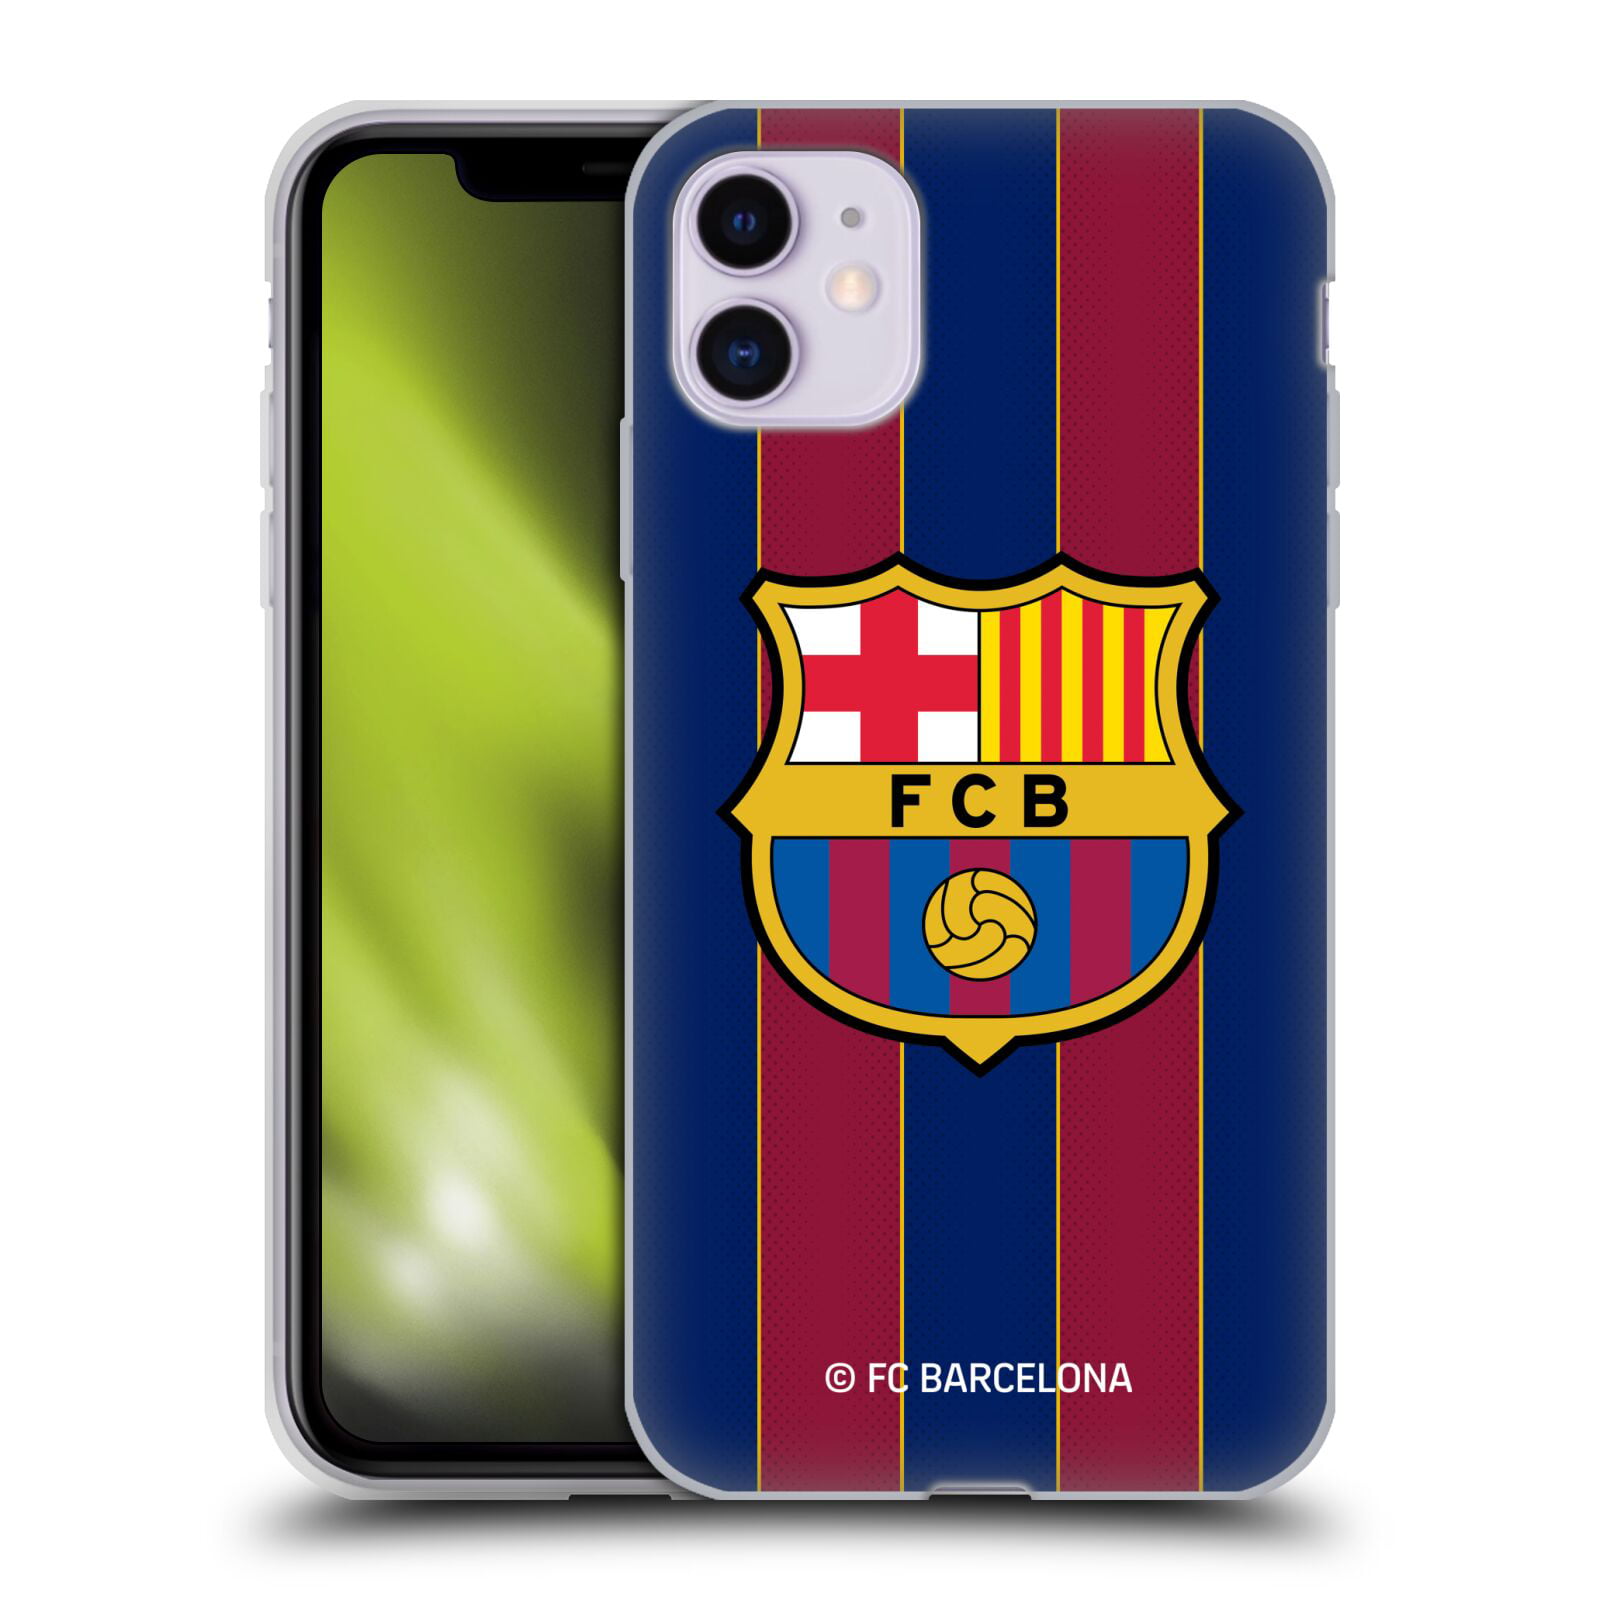 iPhone 8 Official FC Barcelona Third 2017/18 Crest Kit Hybrid Case Compatible for iPhone 7 